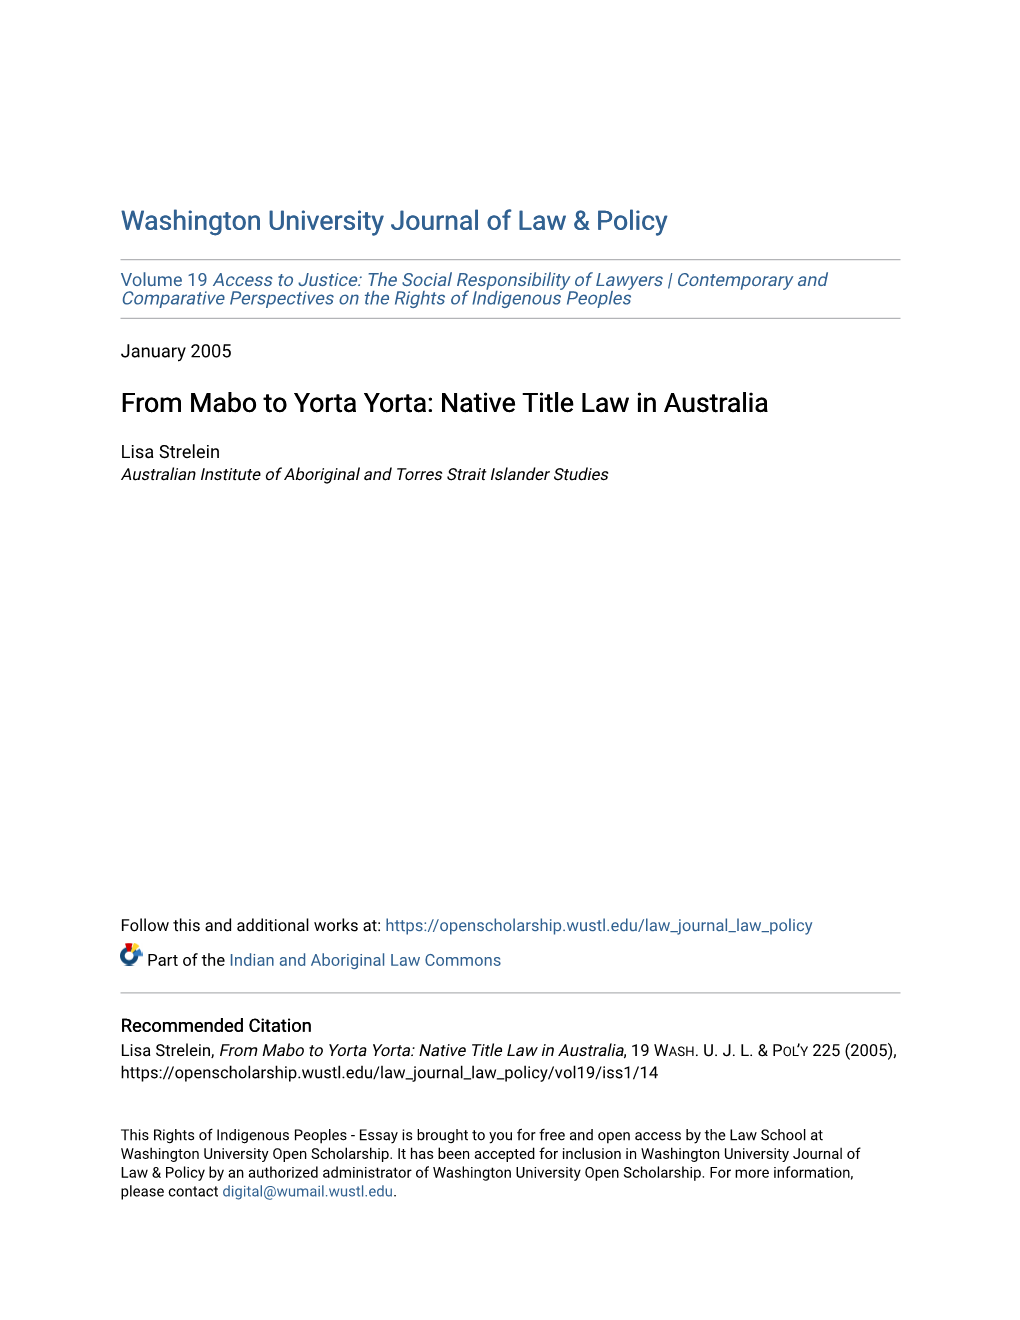 From Mabo to Yorta Yorta: Native Title Law in Australia